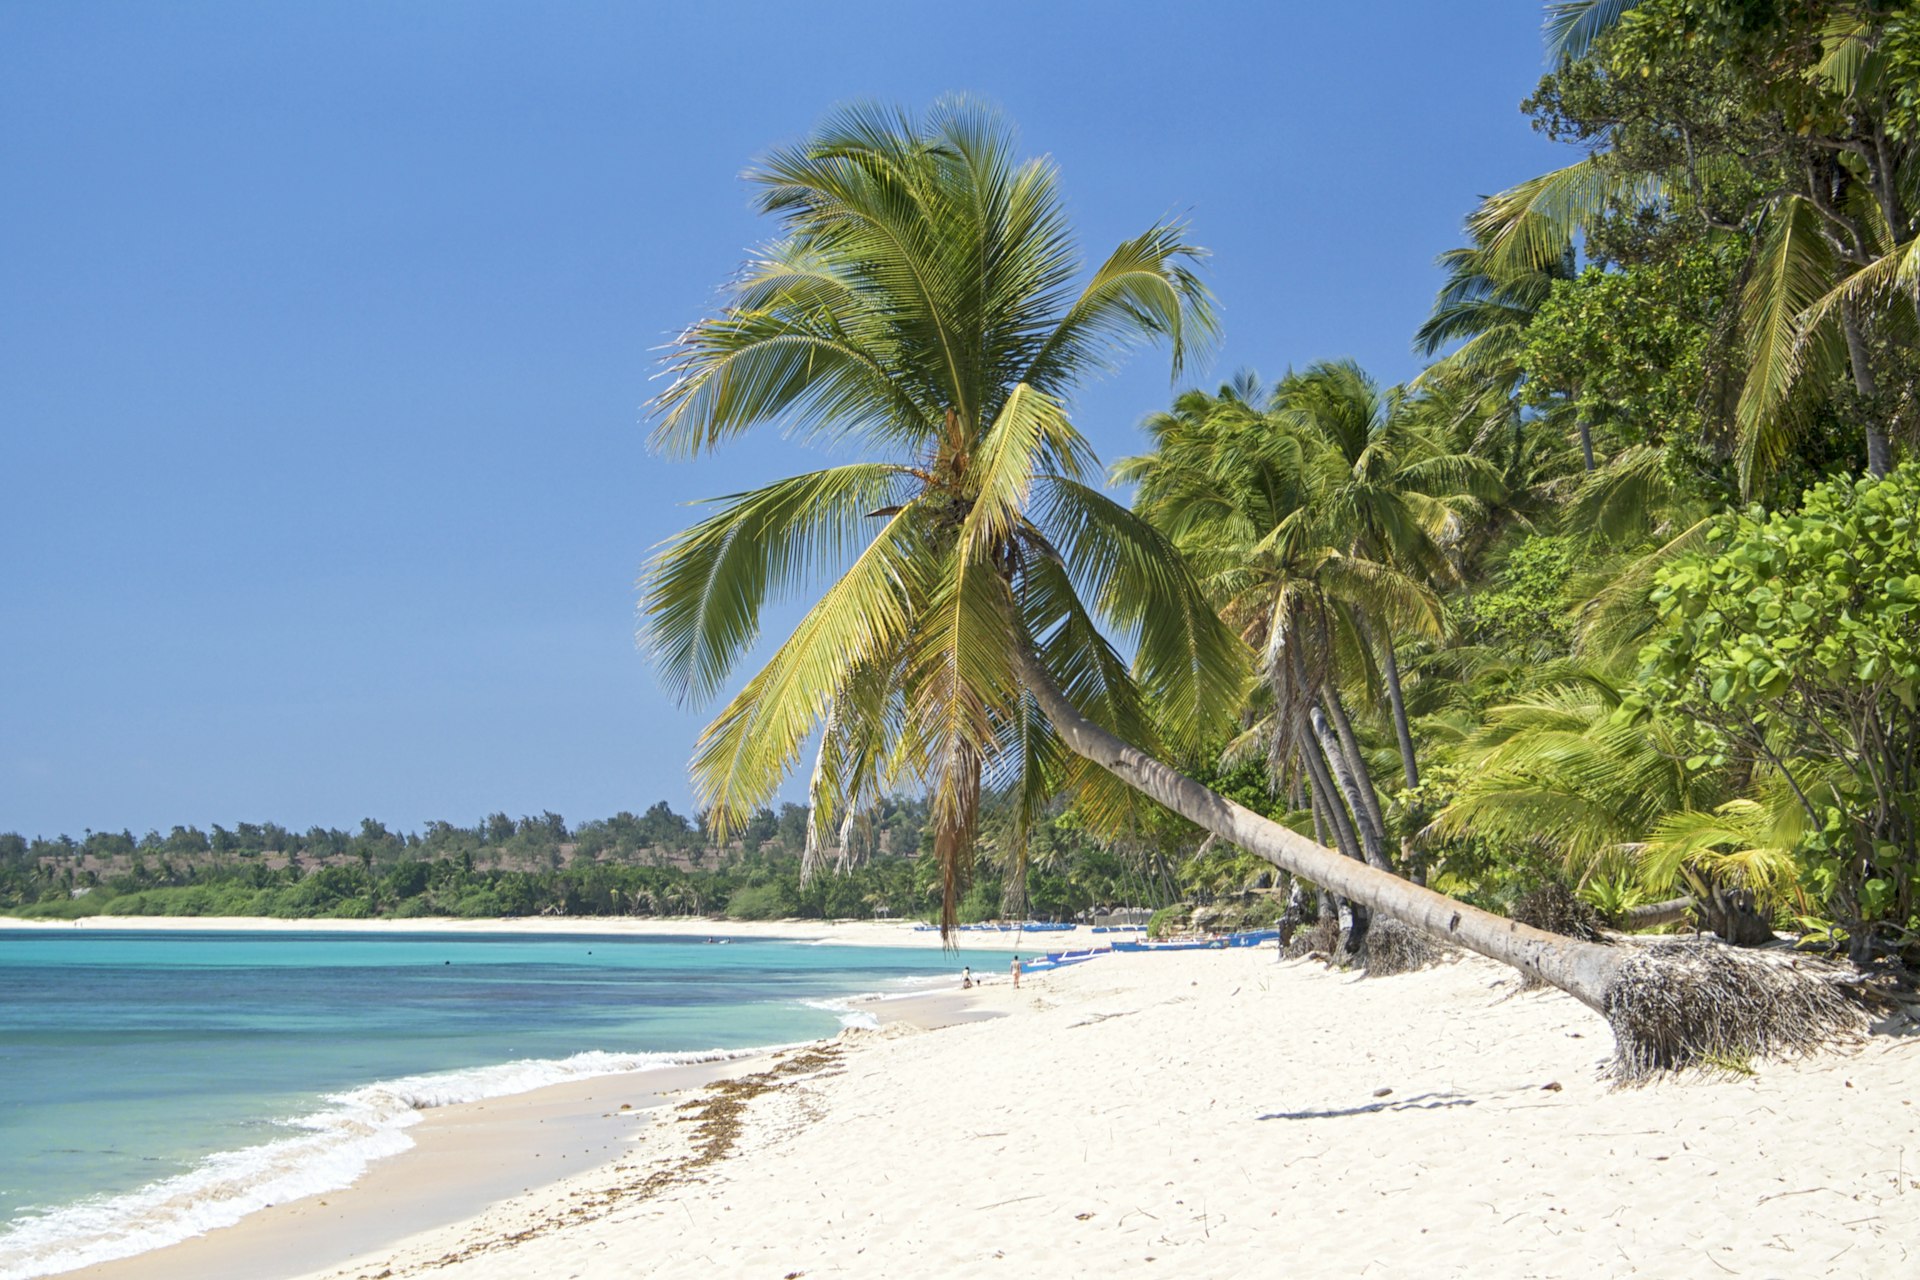 A view of Saud Beach, with palm trees leaning across white sands. Blue water laps the shore.